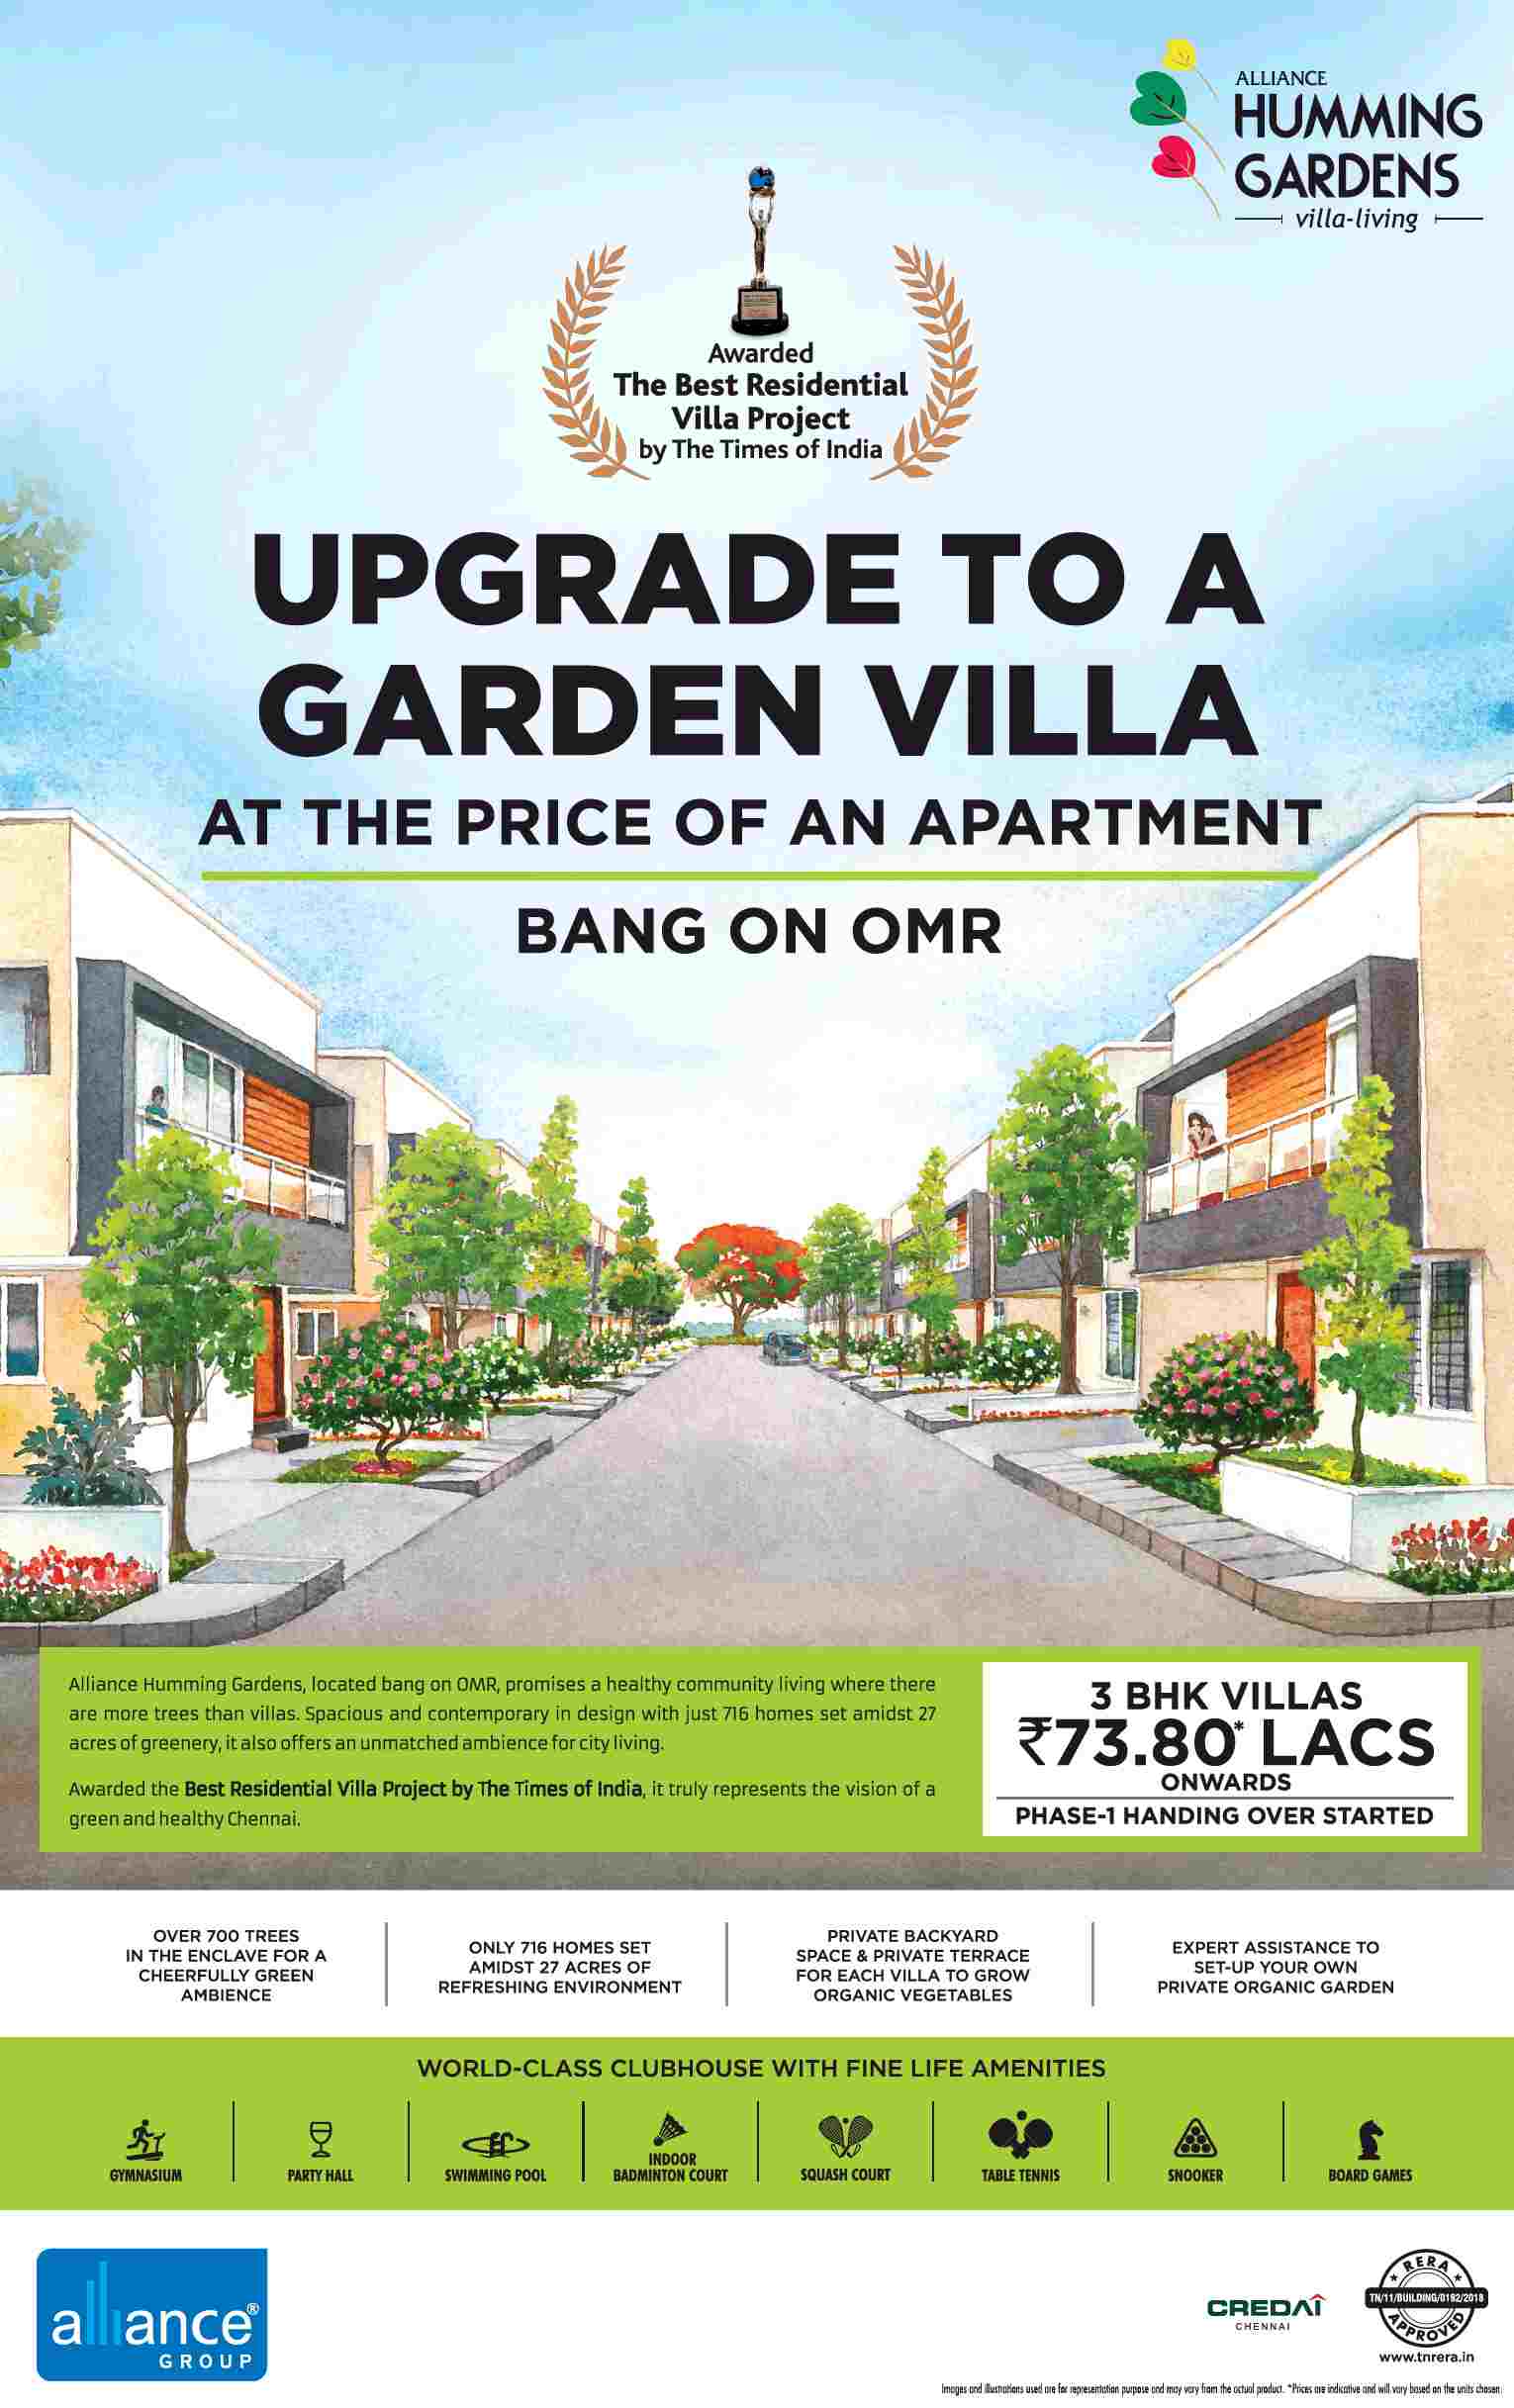 Own 3 BHK villas @ Rs 73.80 Lacs at Alliance Humming Gardens in Chennai